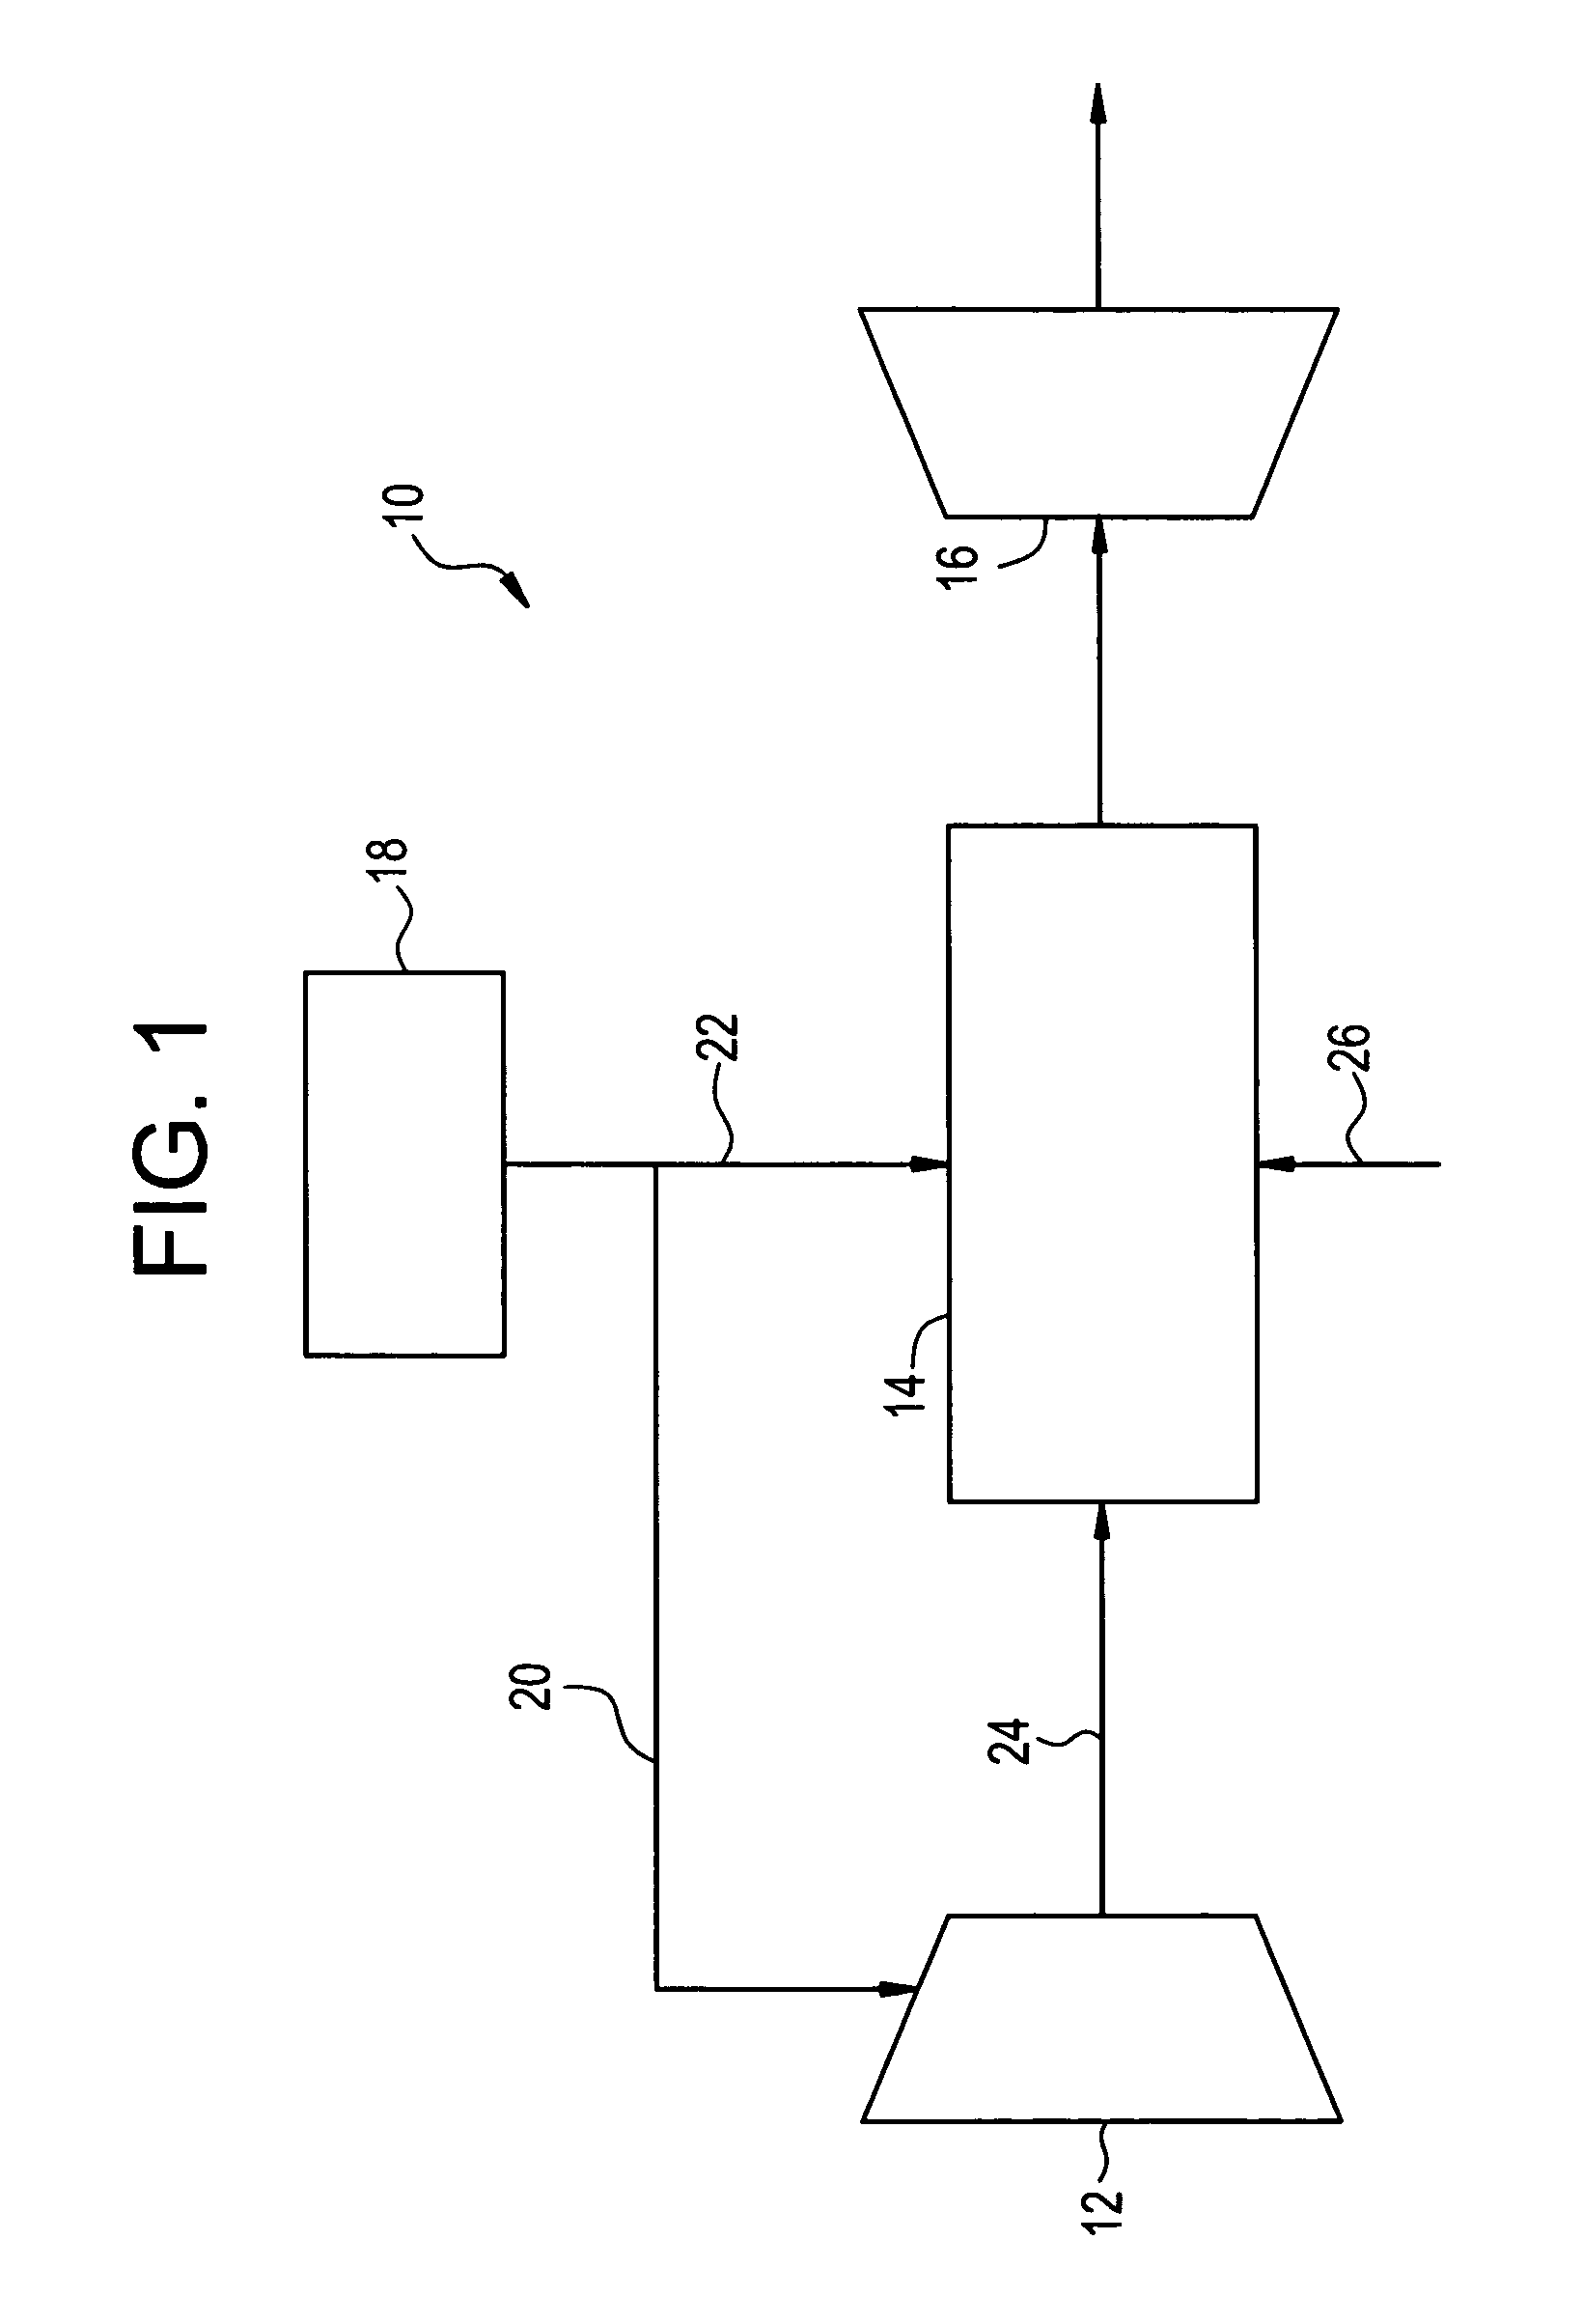 Systems and methods of reducing NOx emissions in gas turbine systems and internal combustion engines